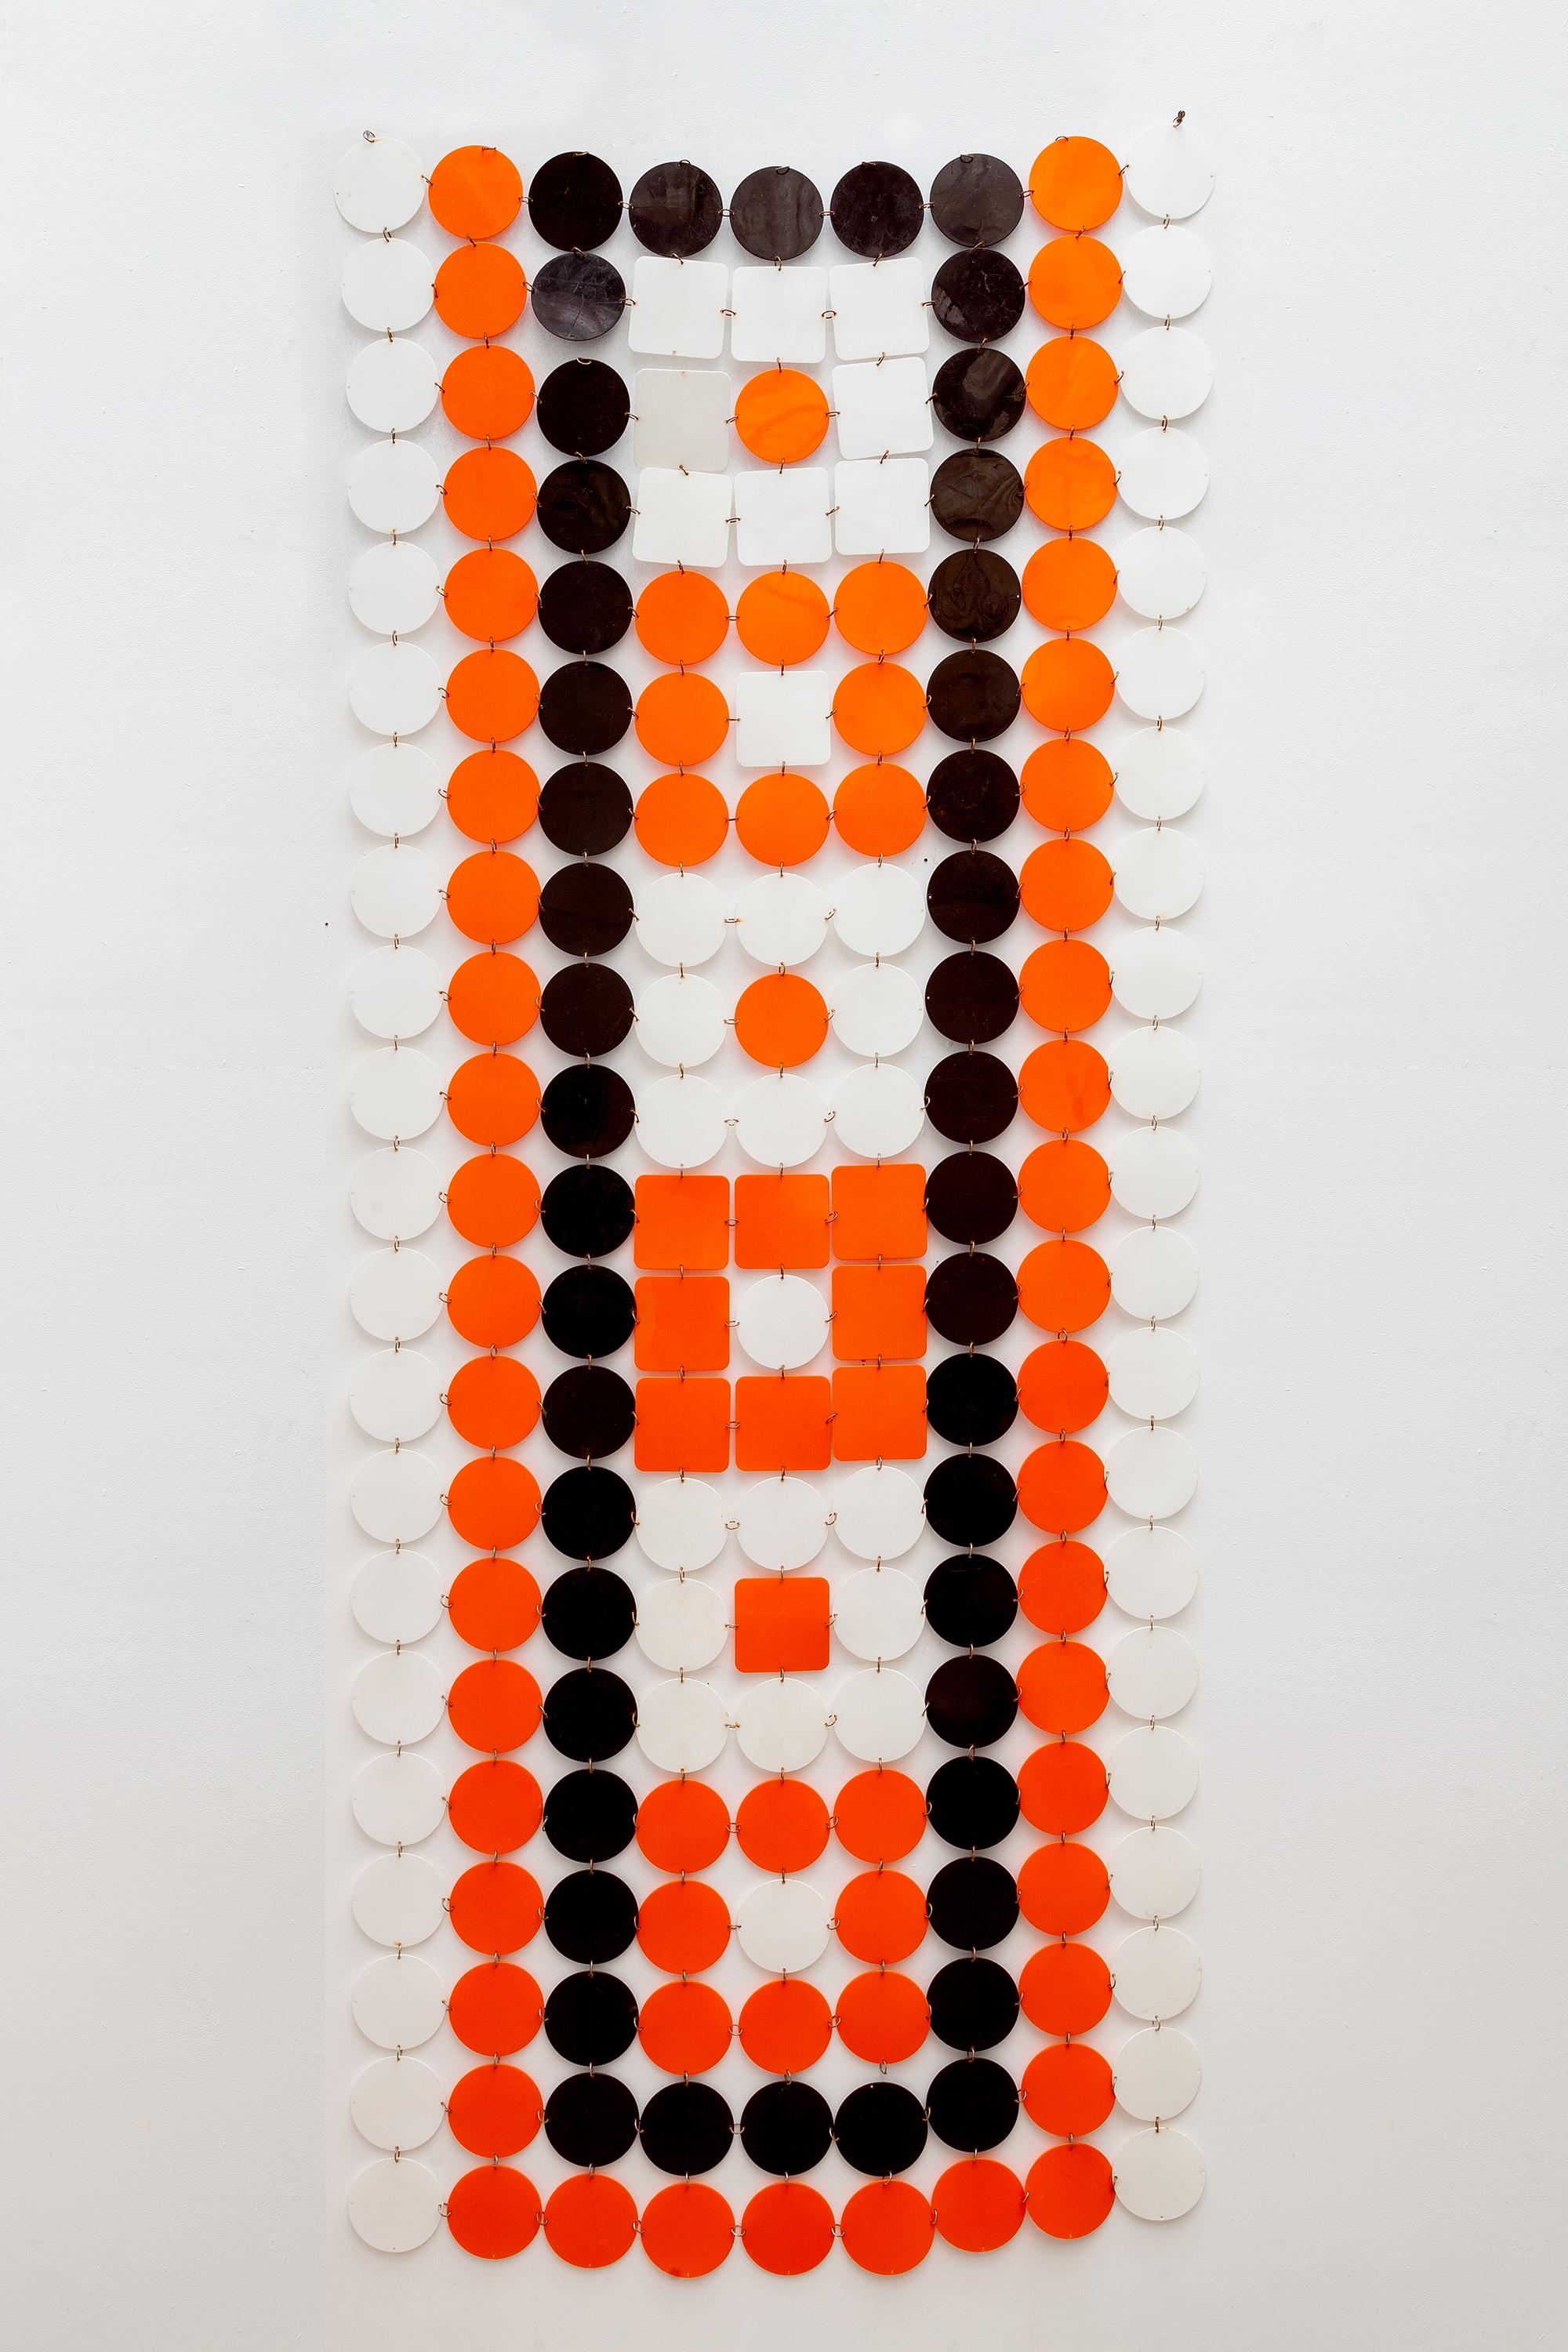 Pop-Art 1960s hanging screen or room divider. Mod style plastic discs connected by metal chromed hoops in shades of bright orange, brown and white.
Can be used in various ways, for example as a curtain for a window, a partition between two rooms